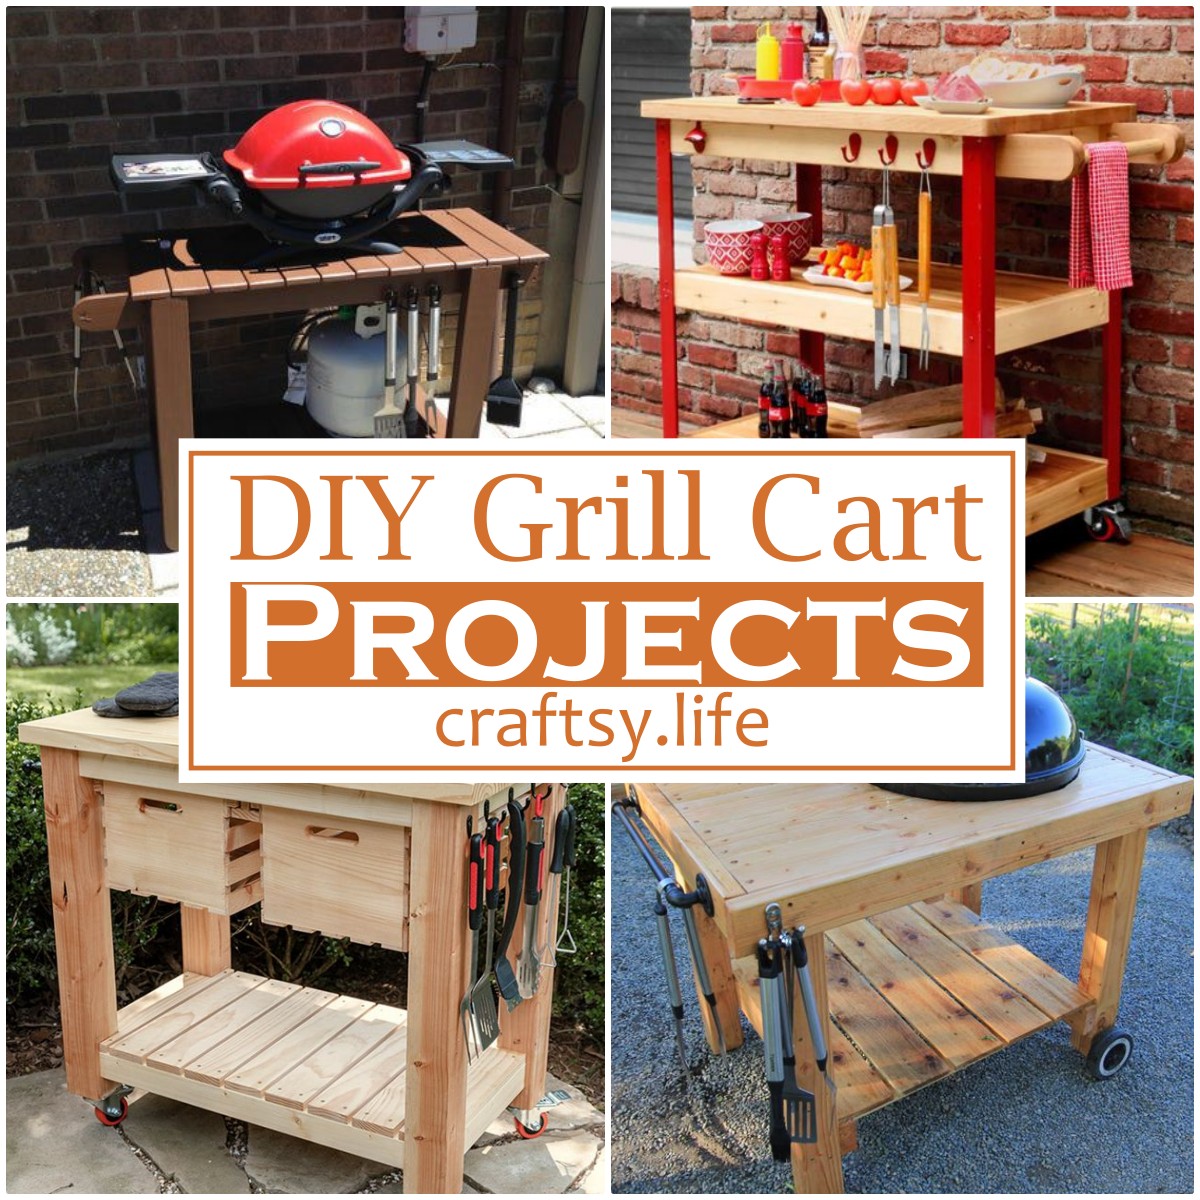 DIY Grill Cart Projects